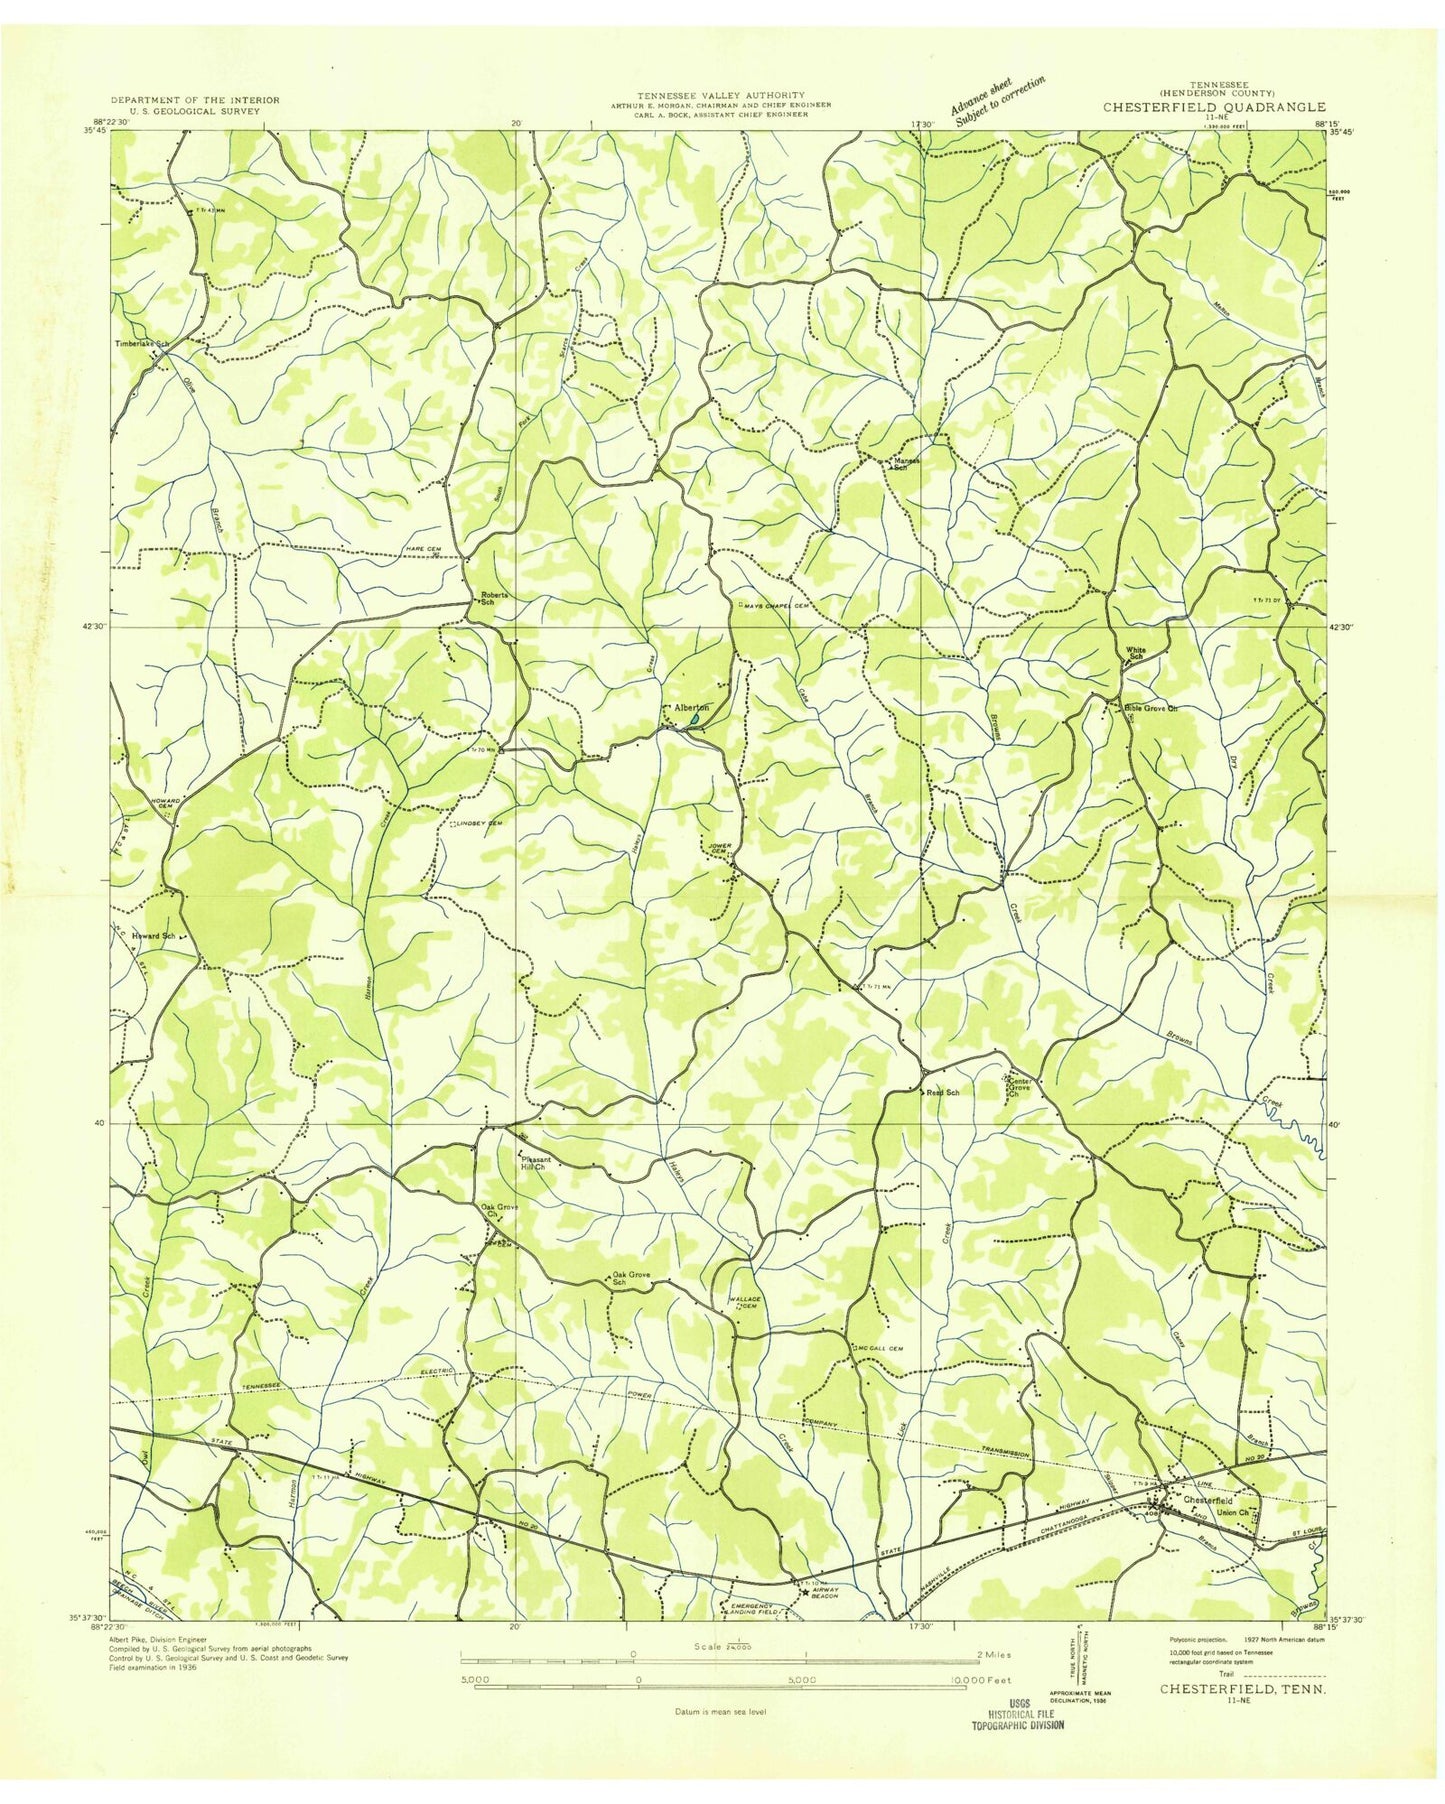 Classic USGS Chesterfield Tennessee 7.5'x7.5' Topo Map Image